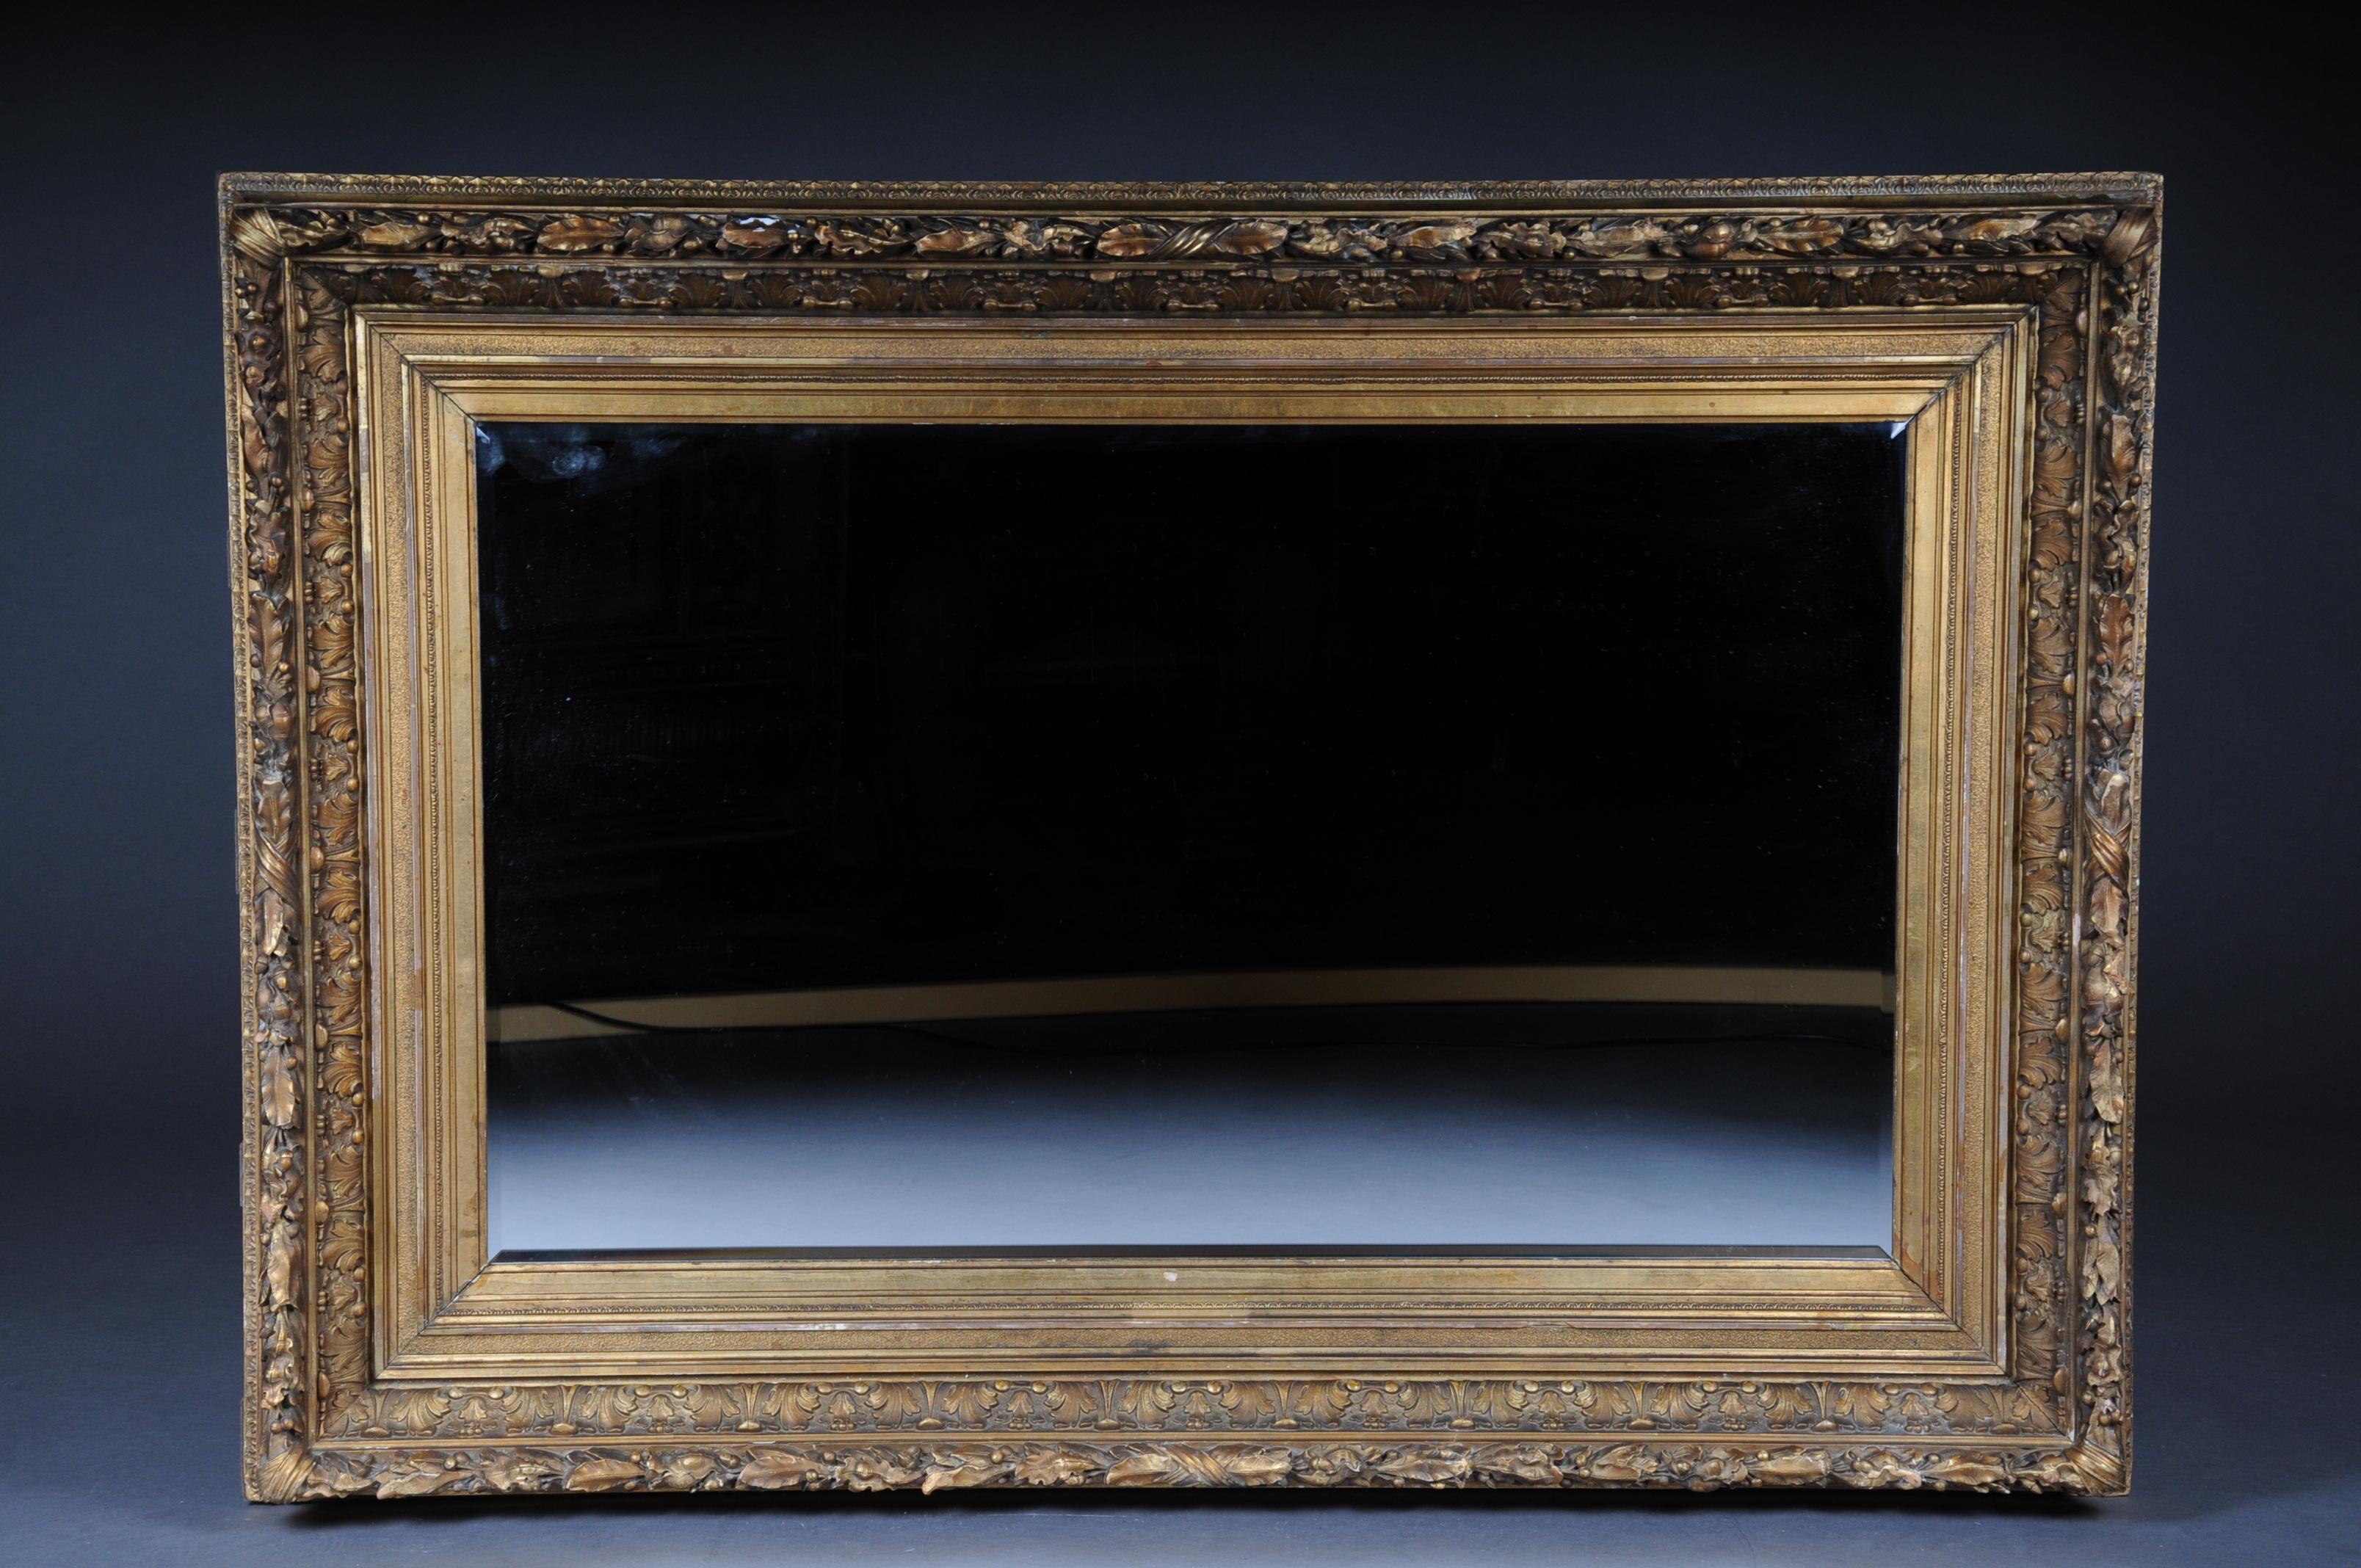 19th century ornate wall mirror gold frame, gilded, circa 1870

Mirror framed with an ornate baroque frame. Frame completely set in gold. A timeless mirror that fits in every household.

(M-43).